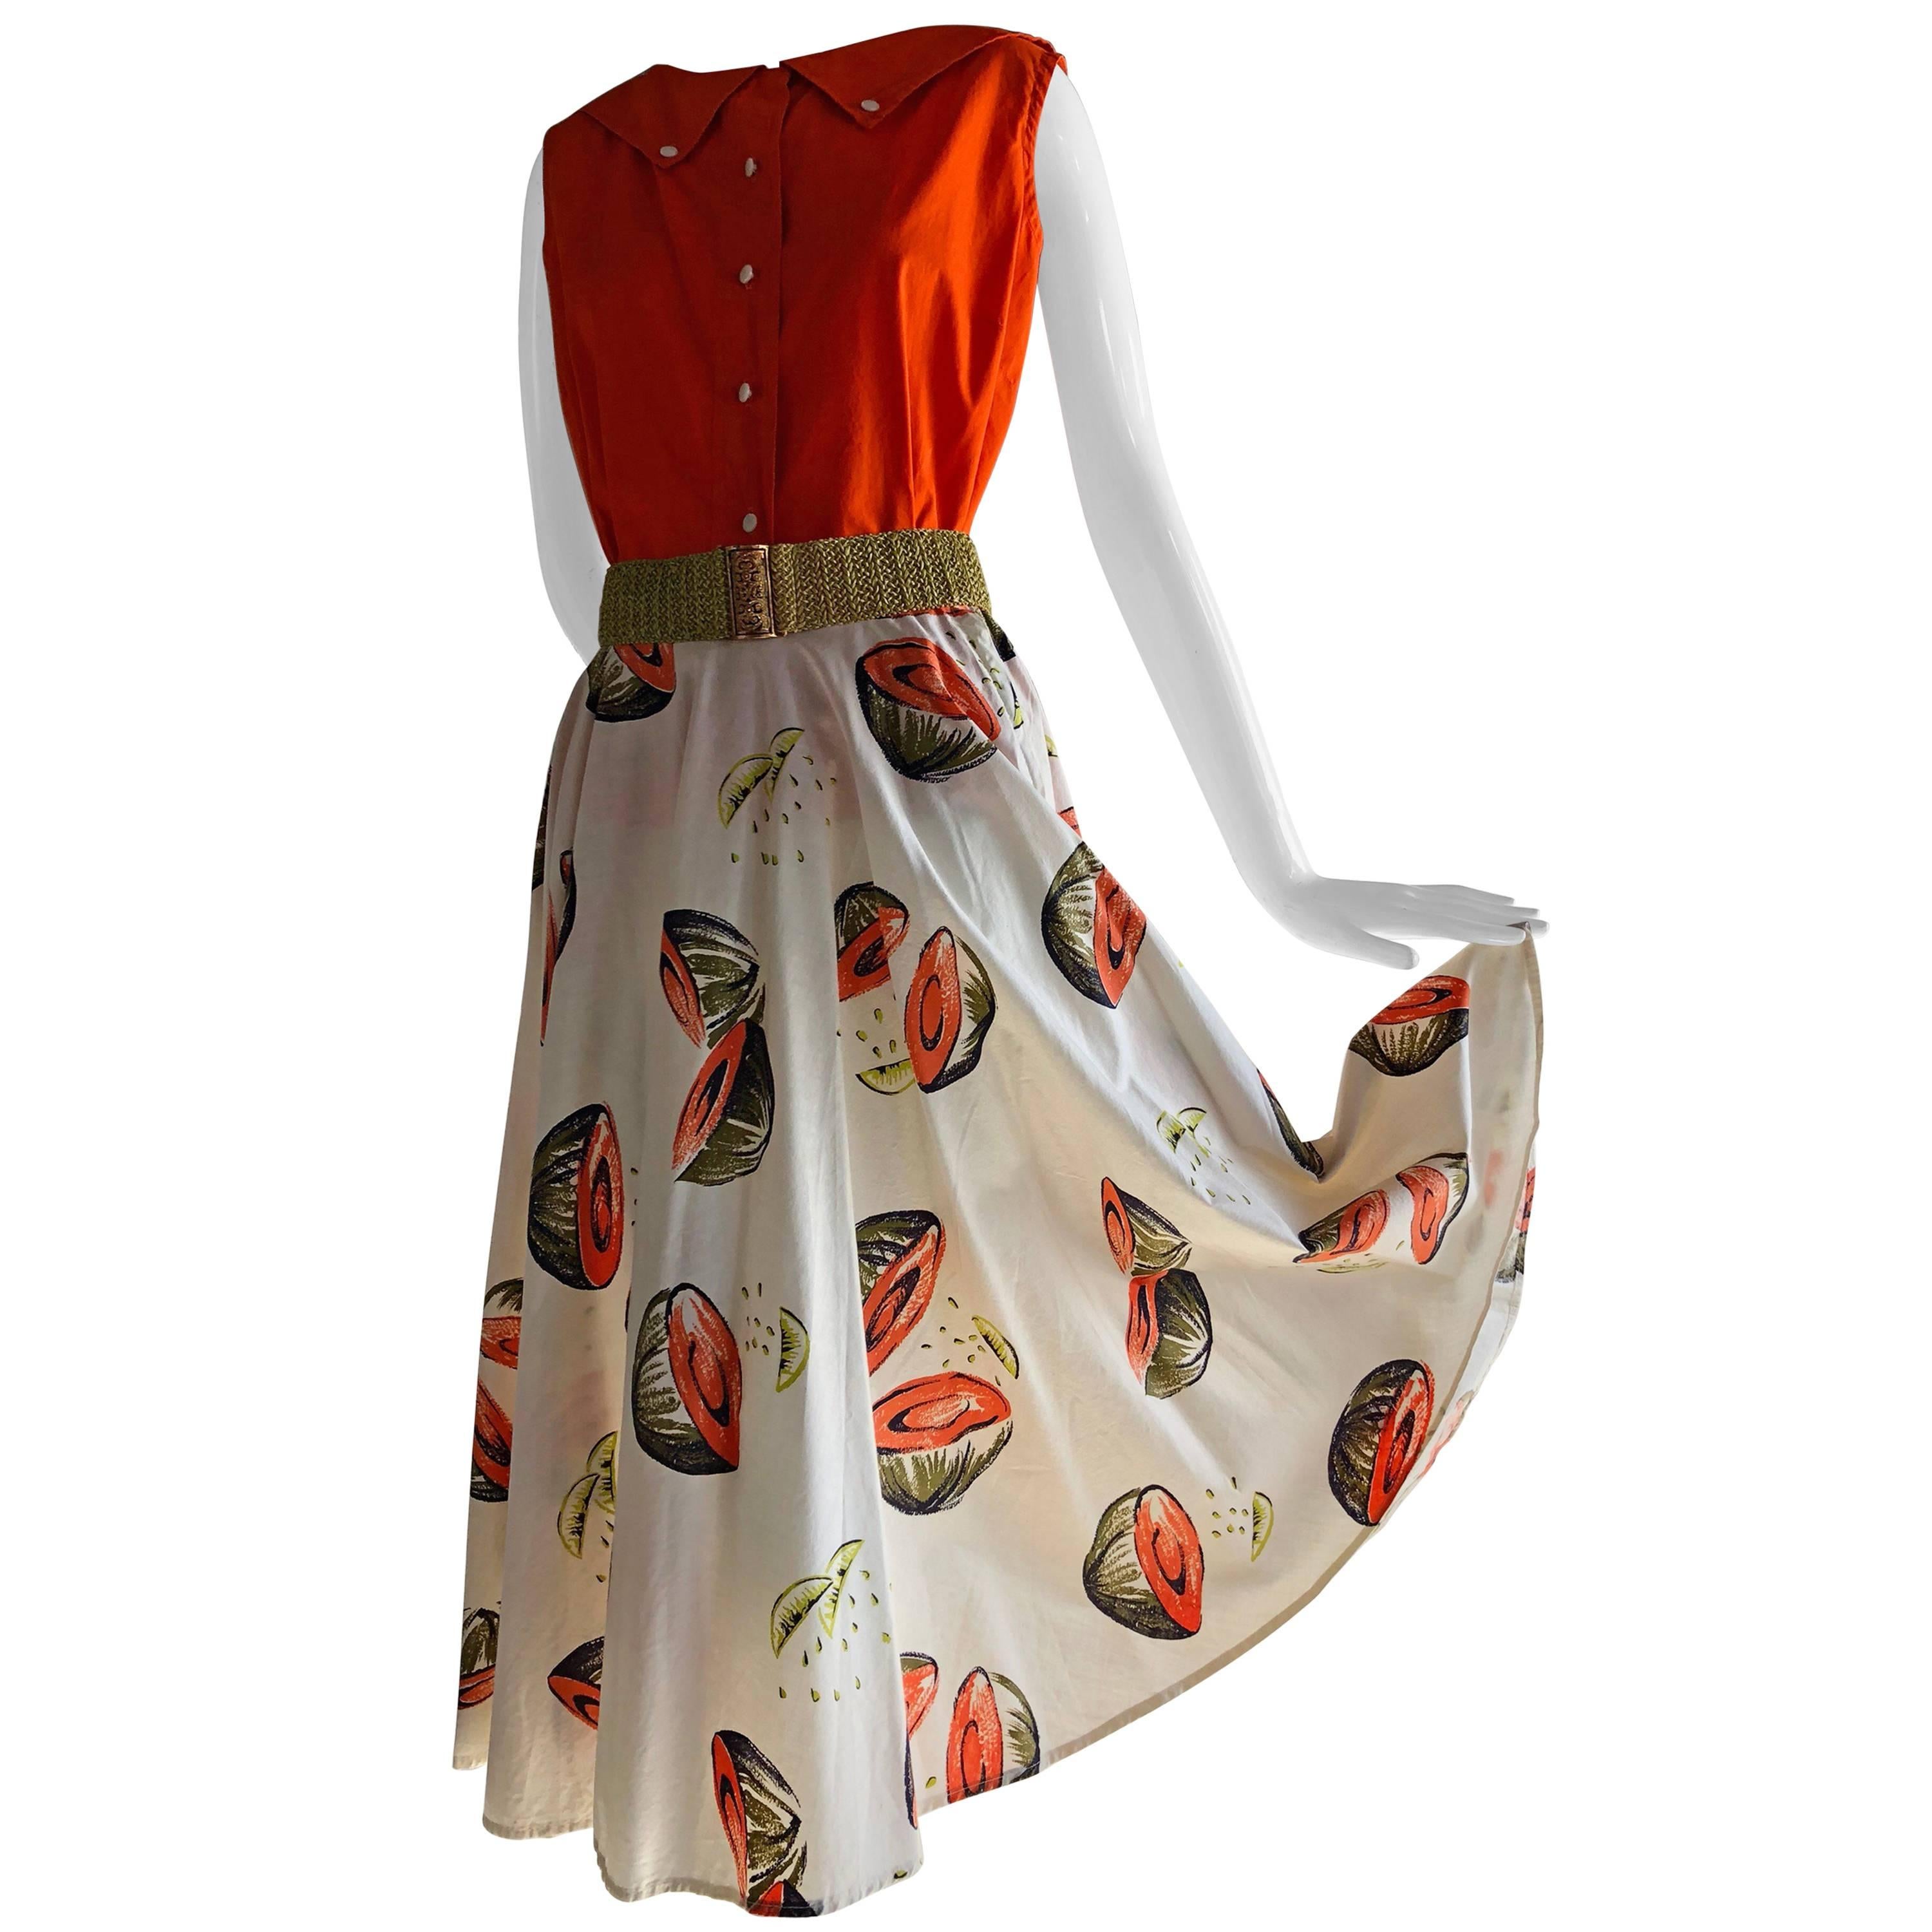 1950s Novelty Sportswear Print Circle Skirt & Coordinating Color Cotton Top 